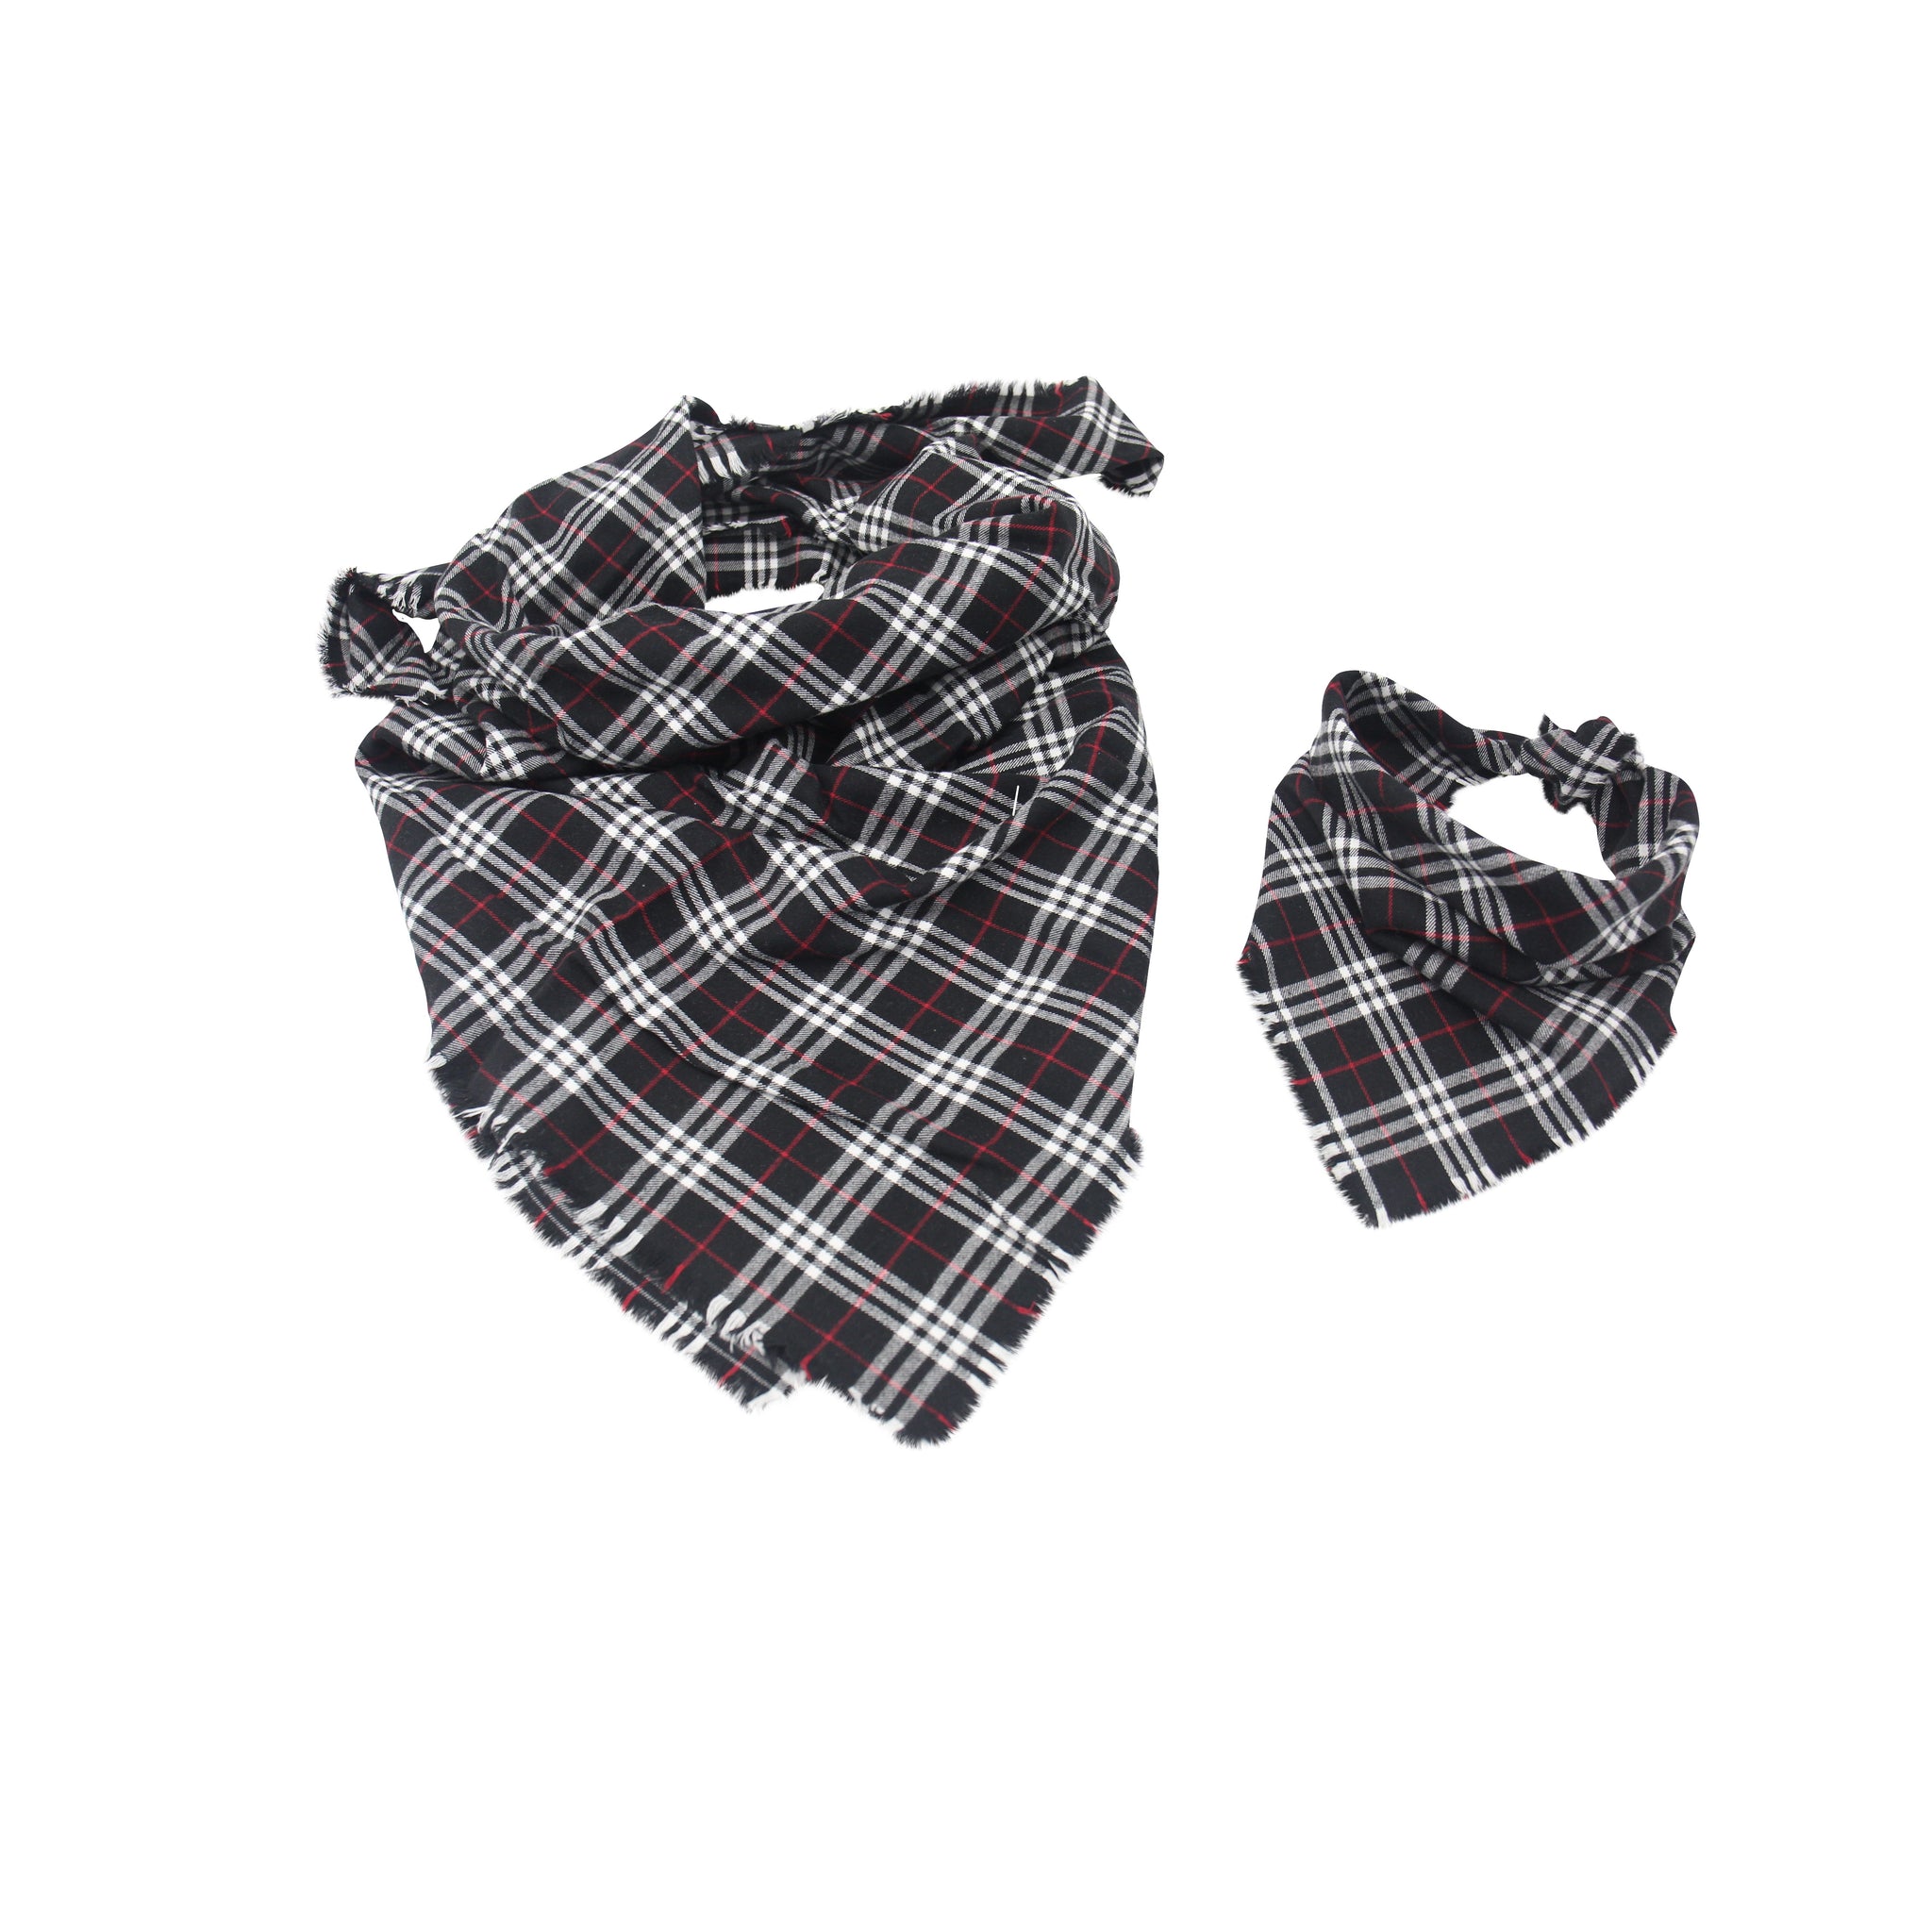 Black, Red and White Plaid - Mommy and Me Set